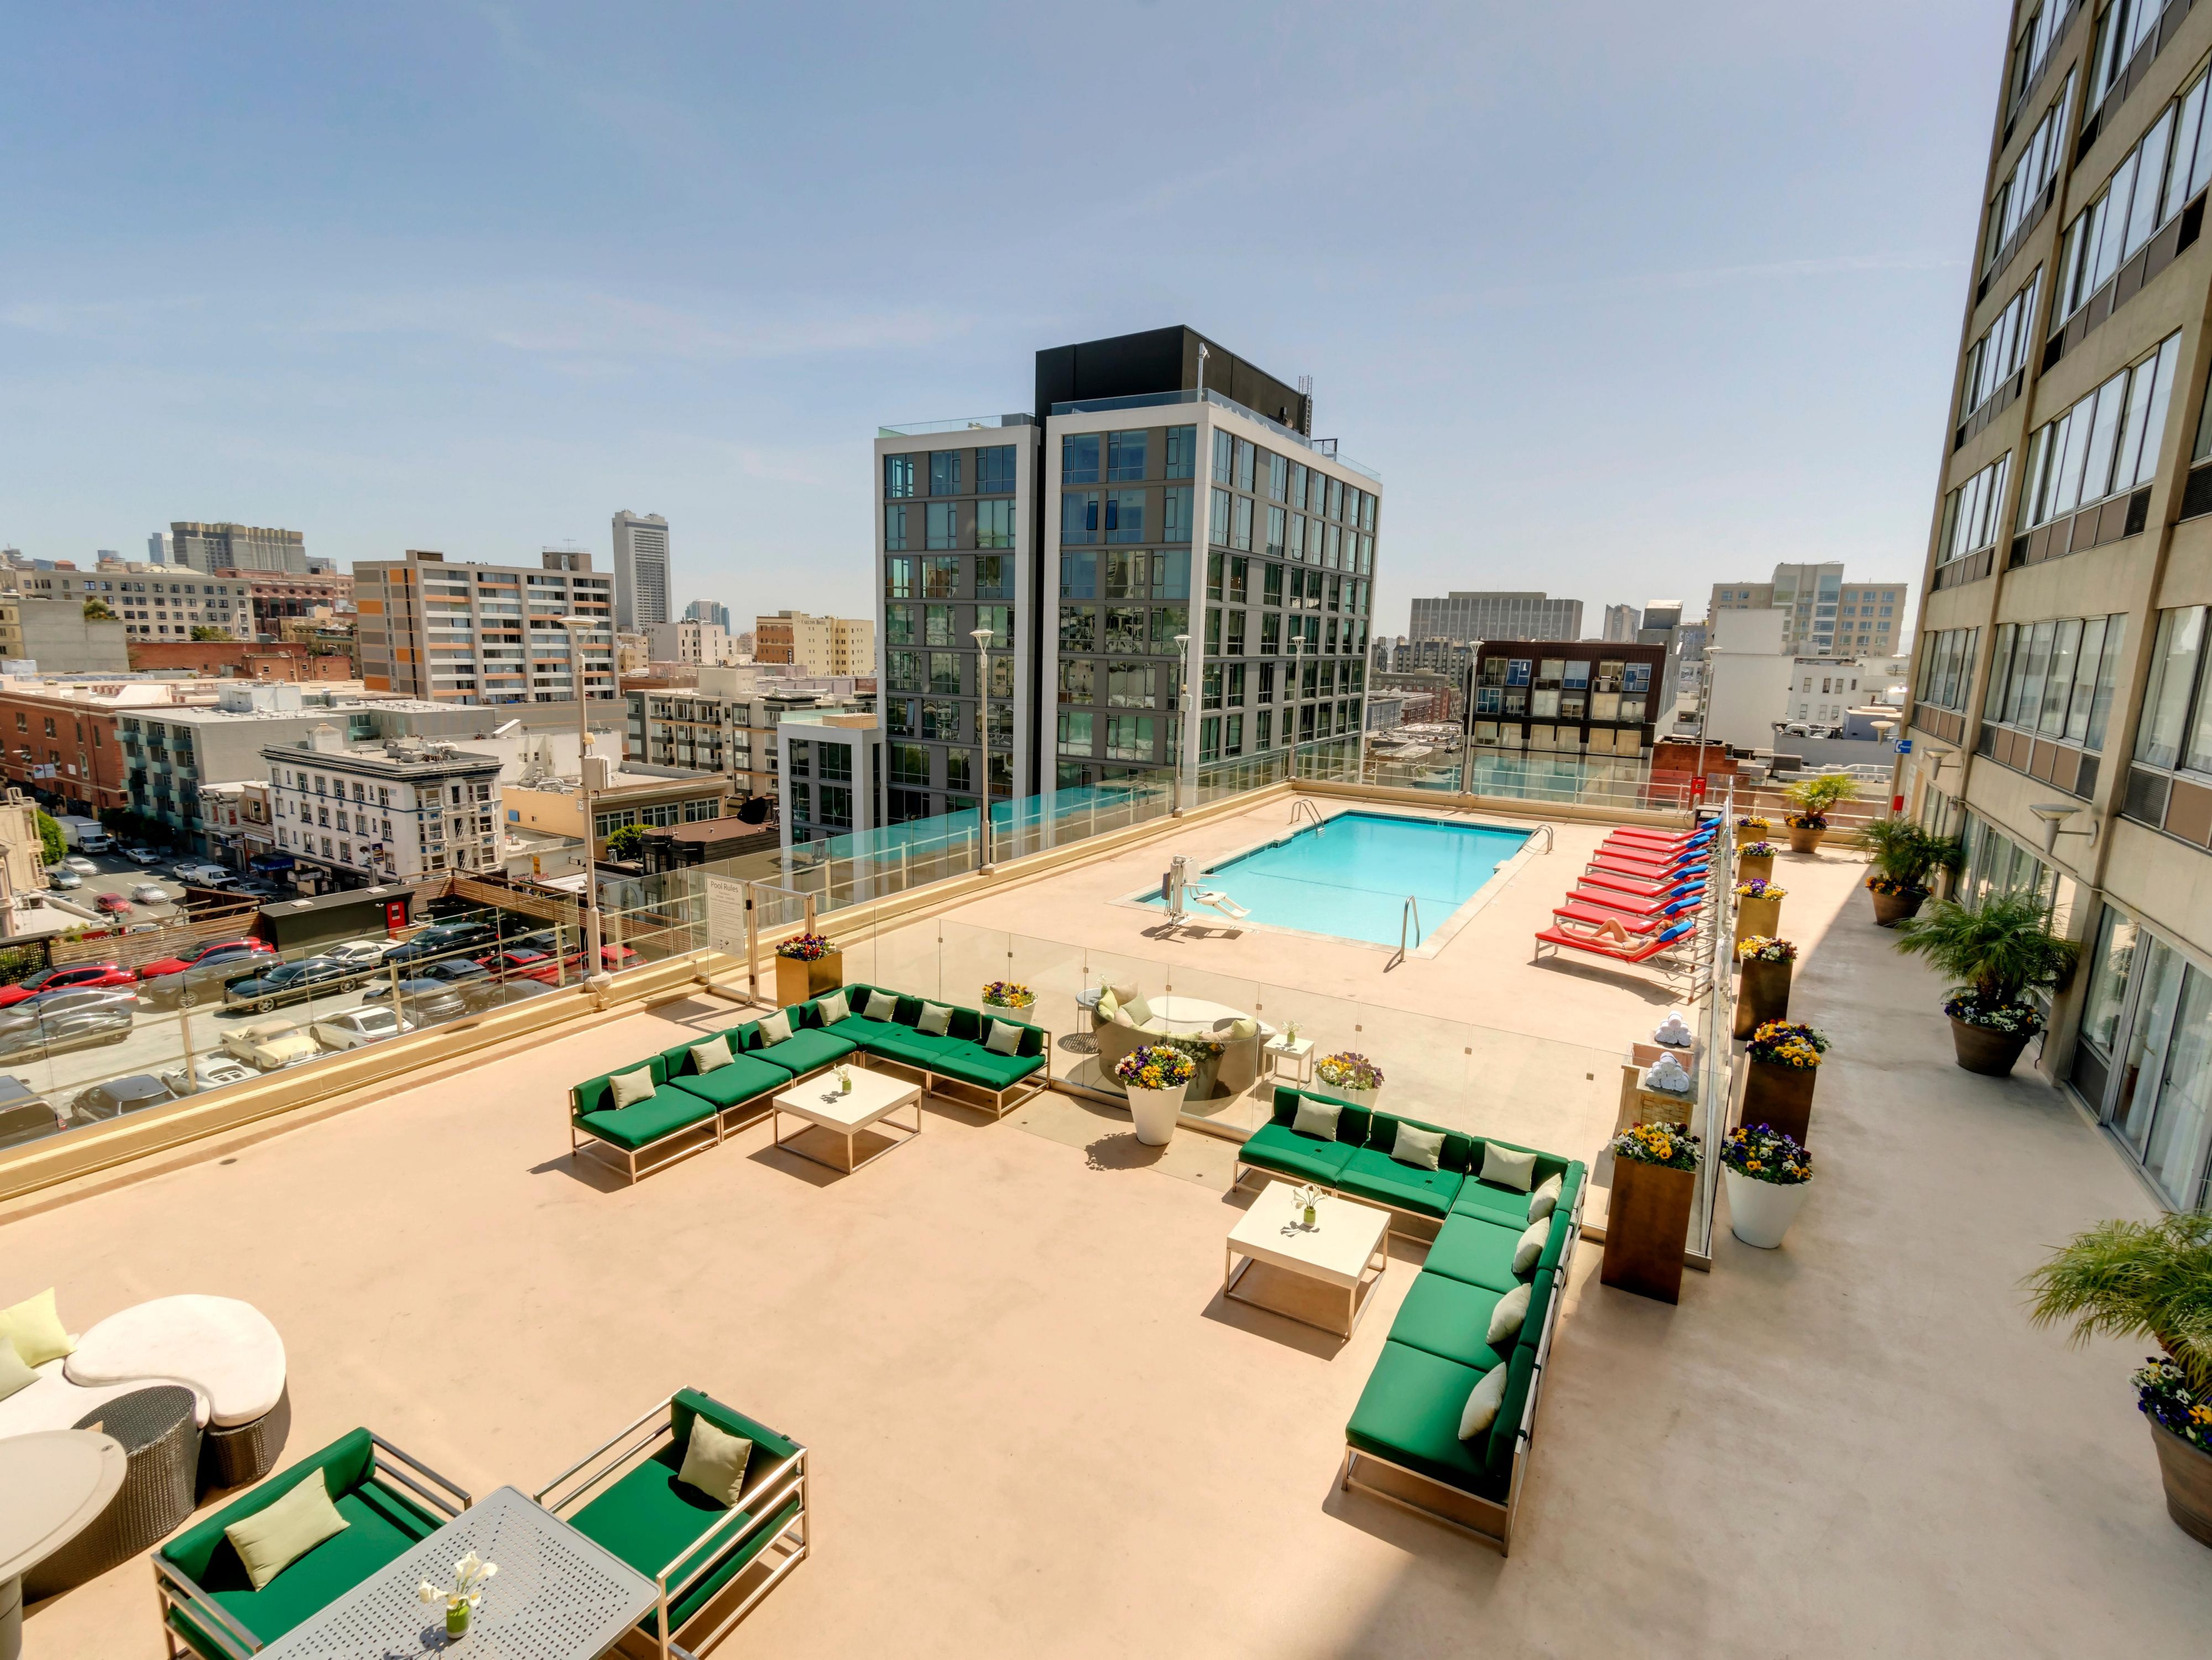 Enjoy the panoramic city views by our heated outdoor pool and sundeck, conduct business at the Business Center, or break a sweat at the Fitness Center. Holiday Inn San Francisco-Golden Gateway offers a variety of amenities for the modern traveler.
